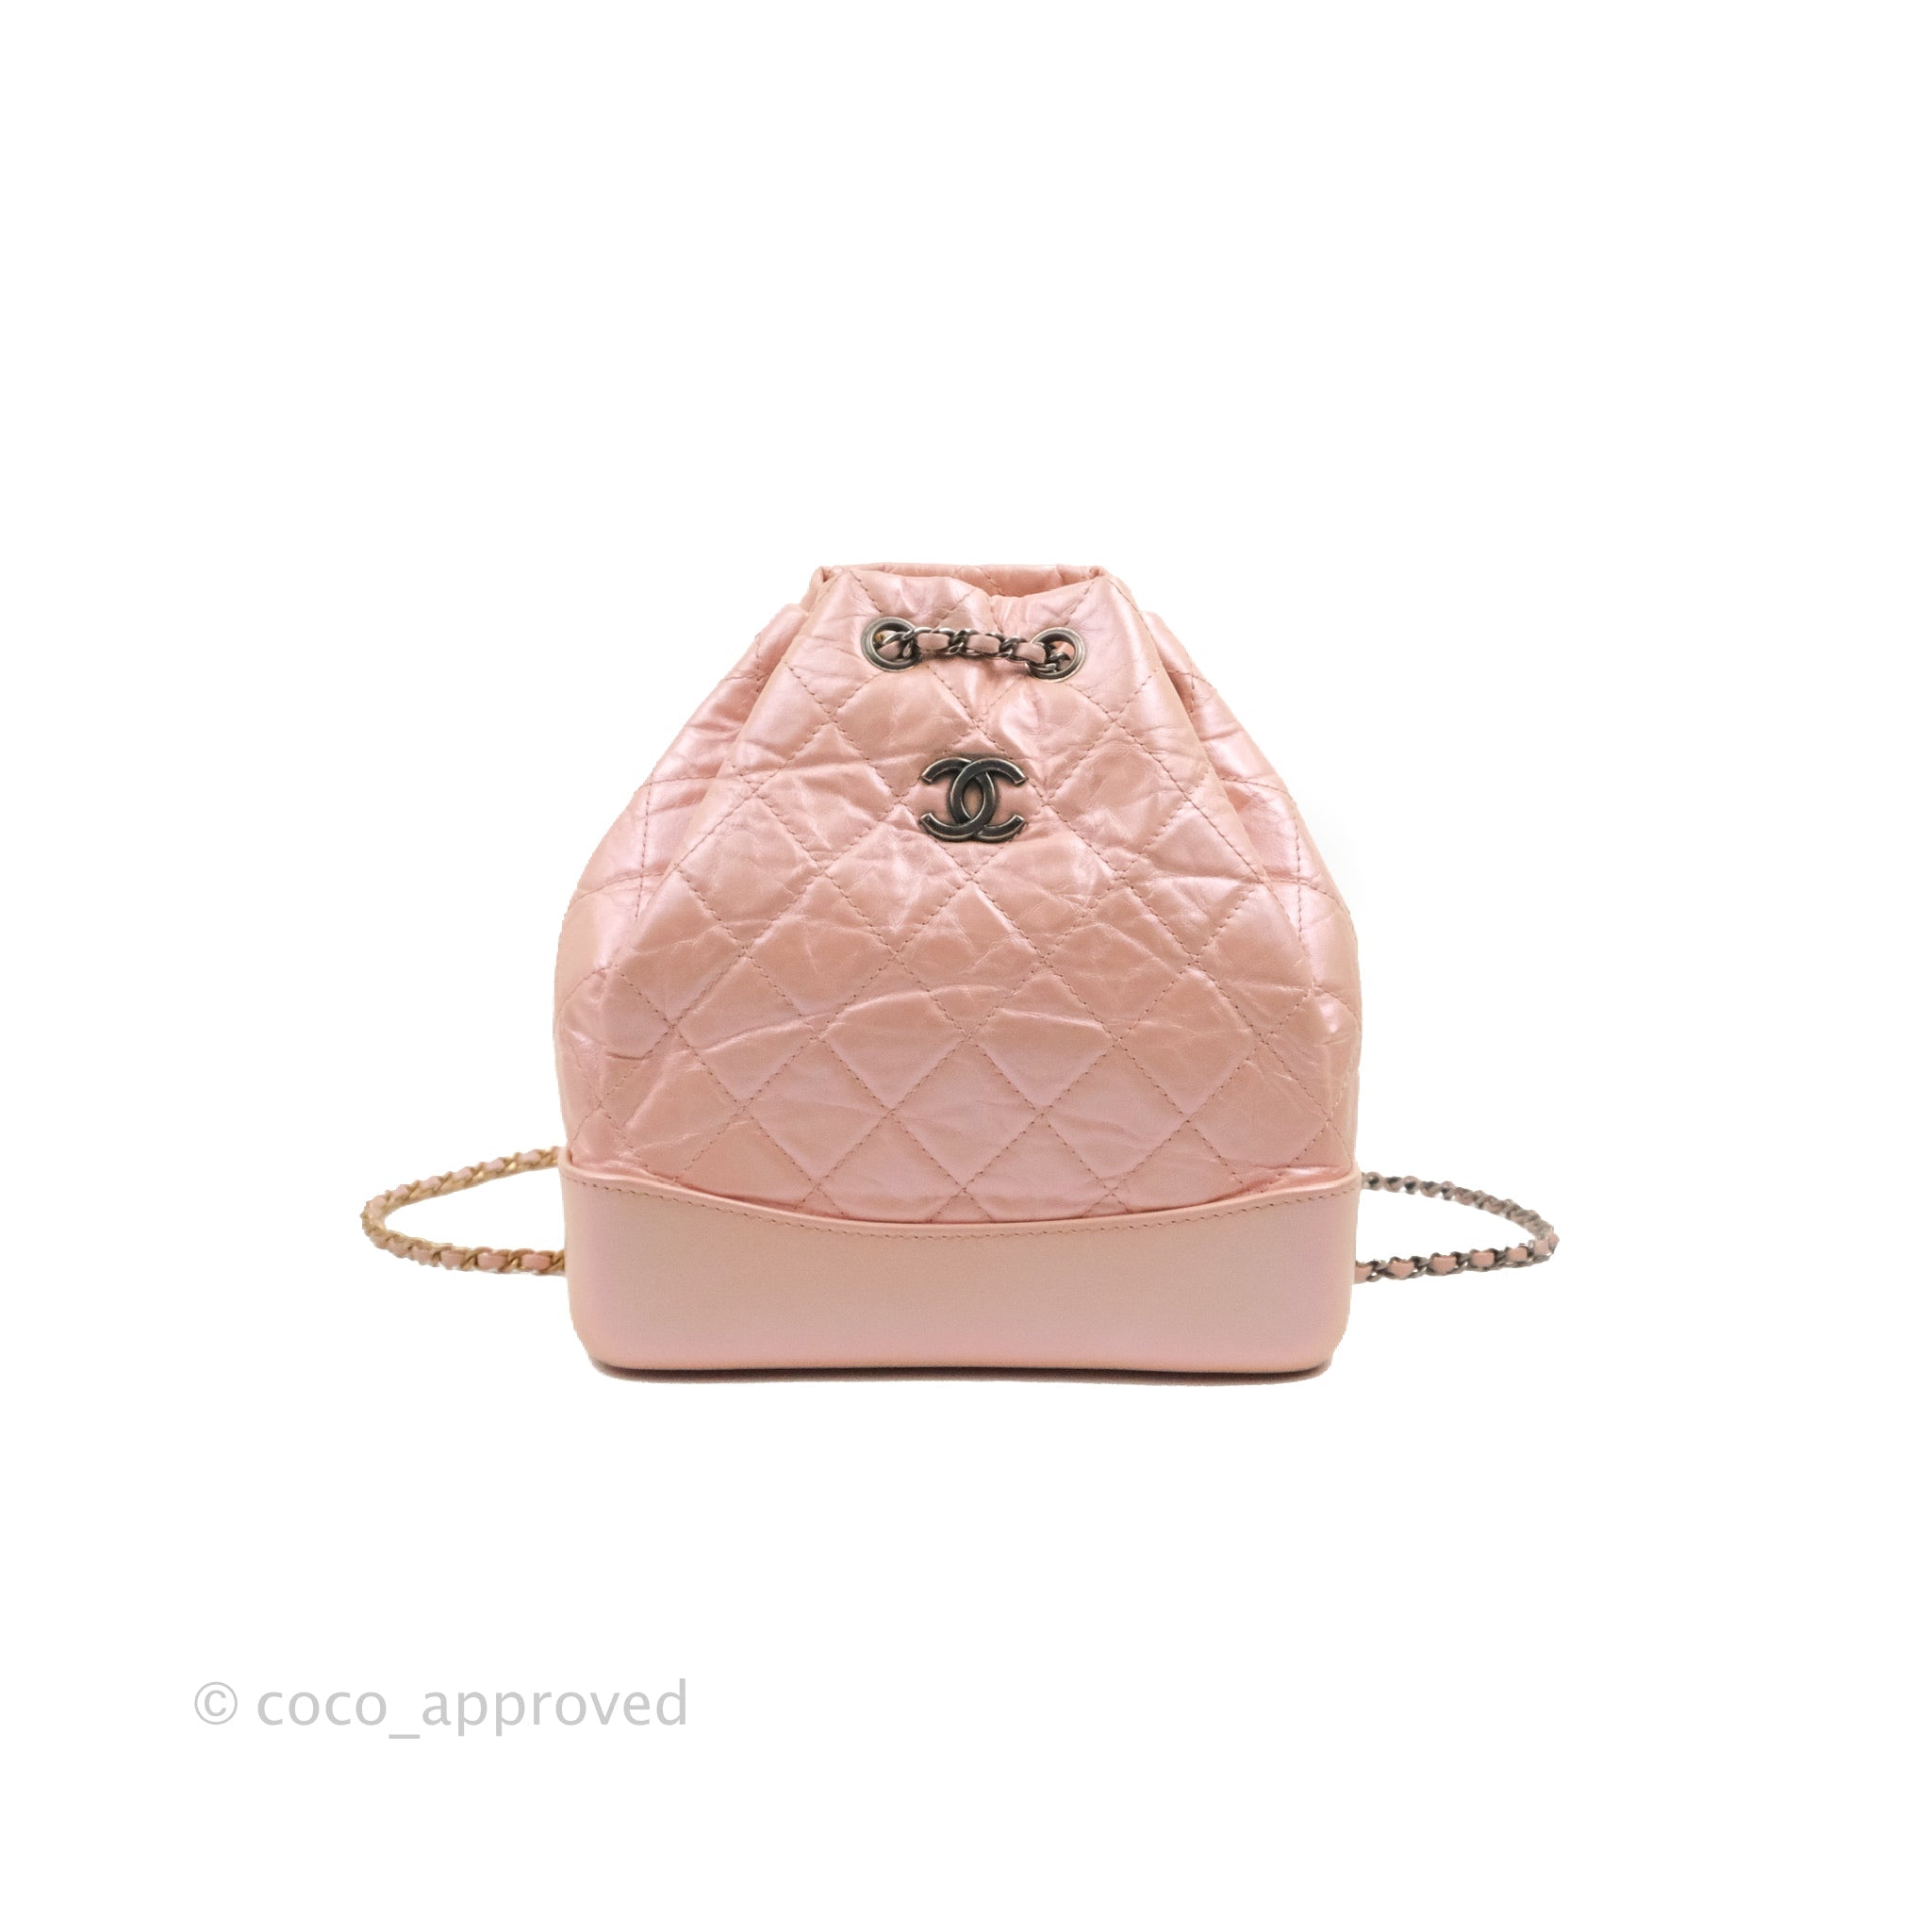 Chanel Iridescent Pink COMPARISONS with similar Pink tones and